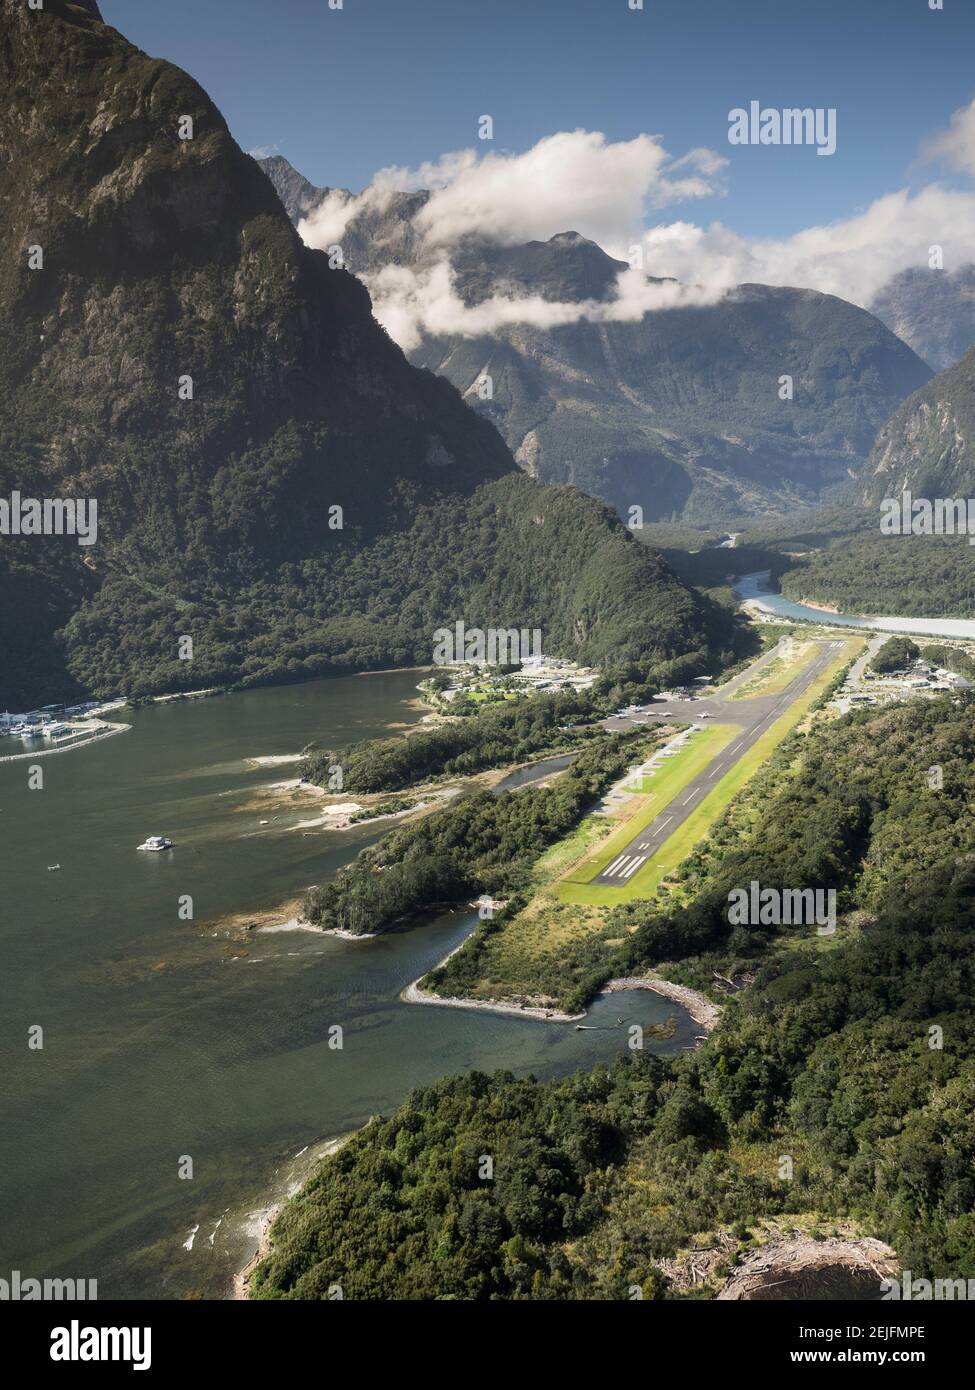 Aerial view of airport at Milford Sound, South Island, New Zealand Stock Photo